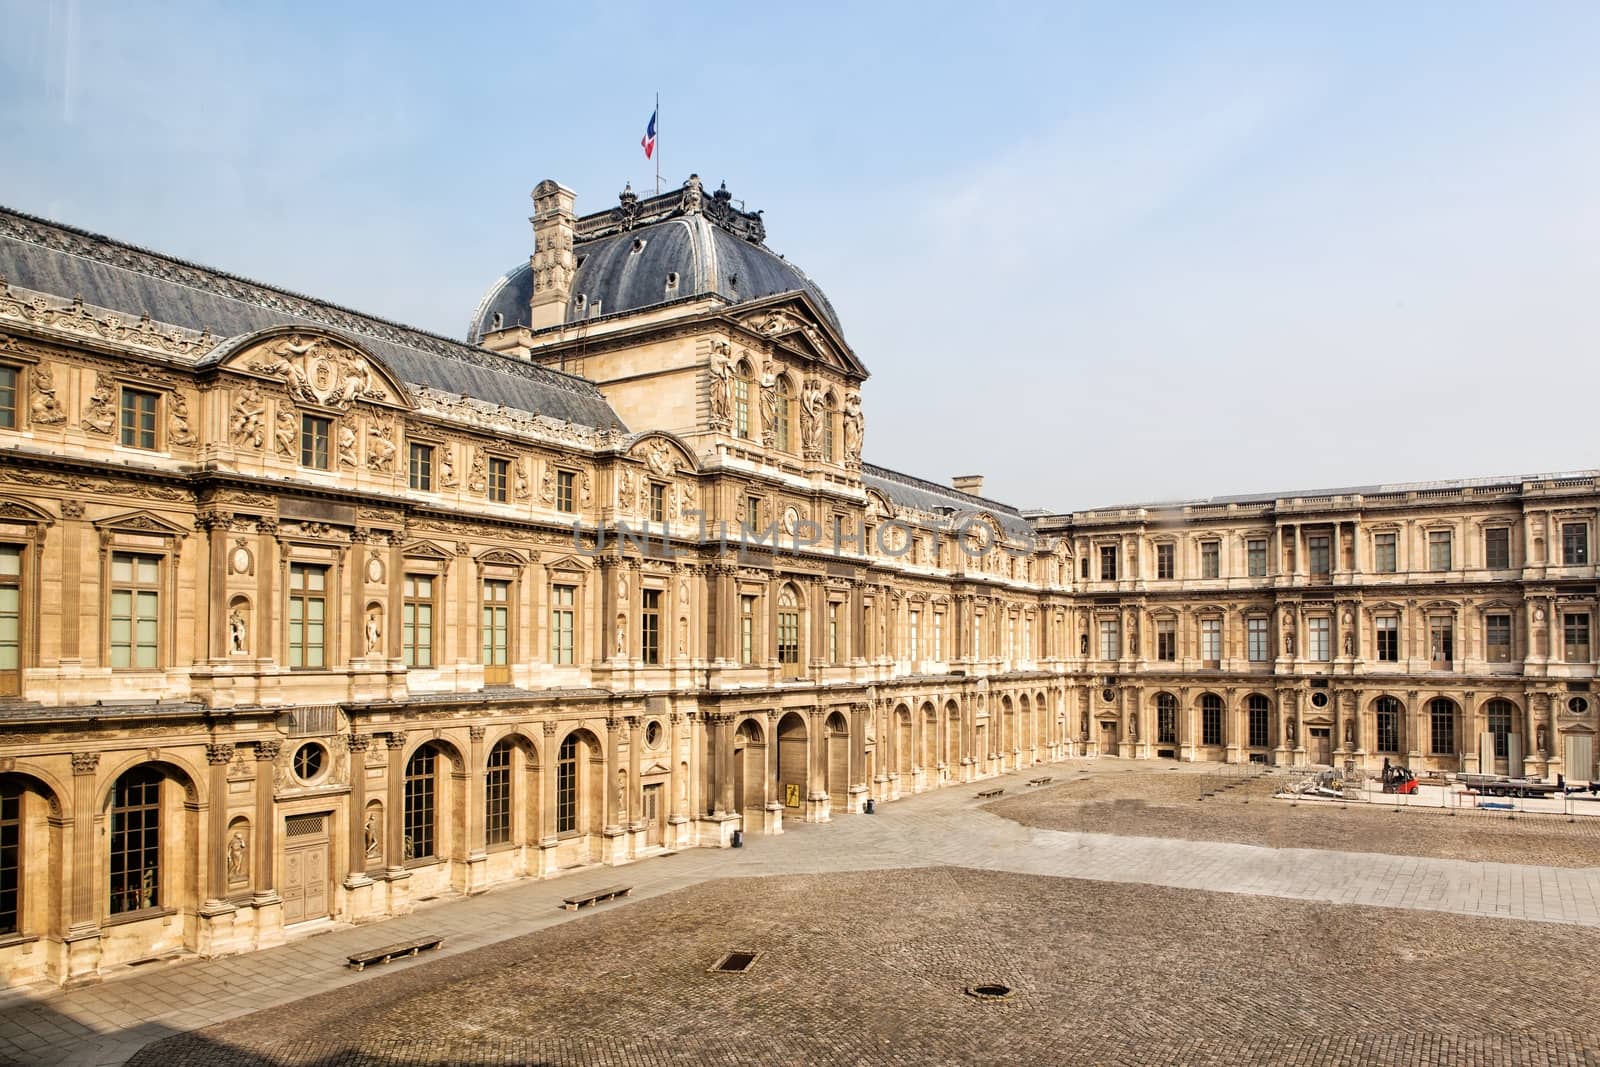 External view of the Louvre Museum (Musee du Louvre) in Paris, France by mitakag